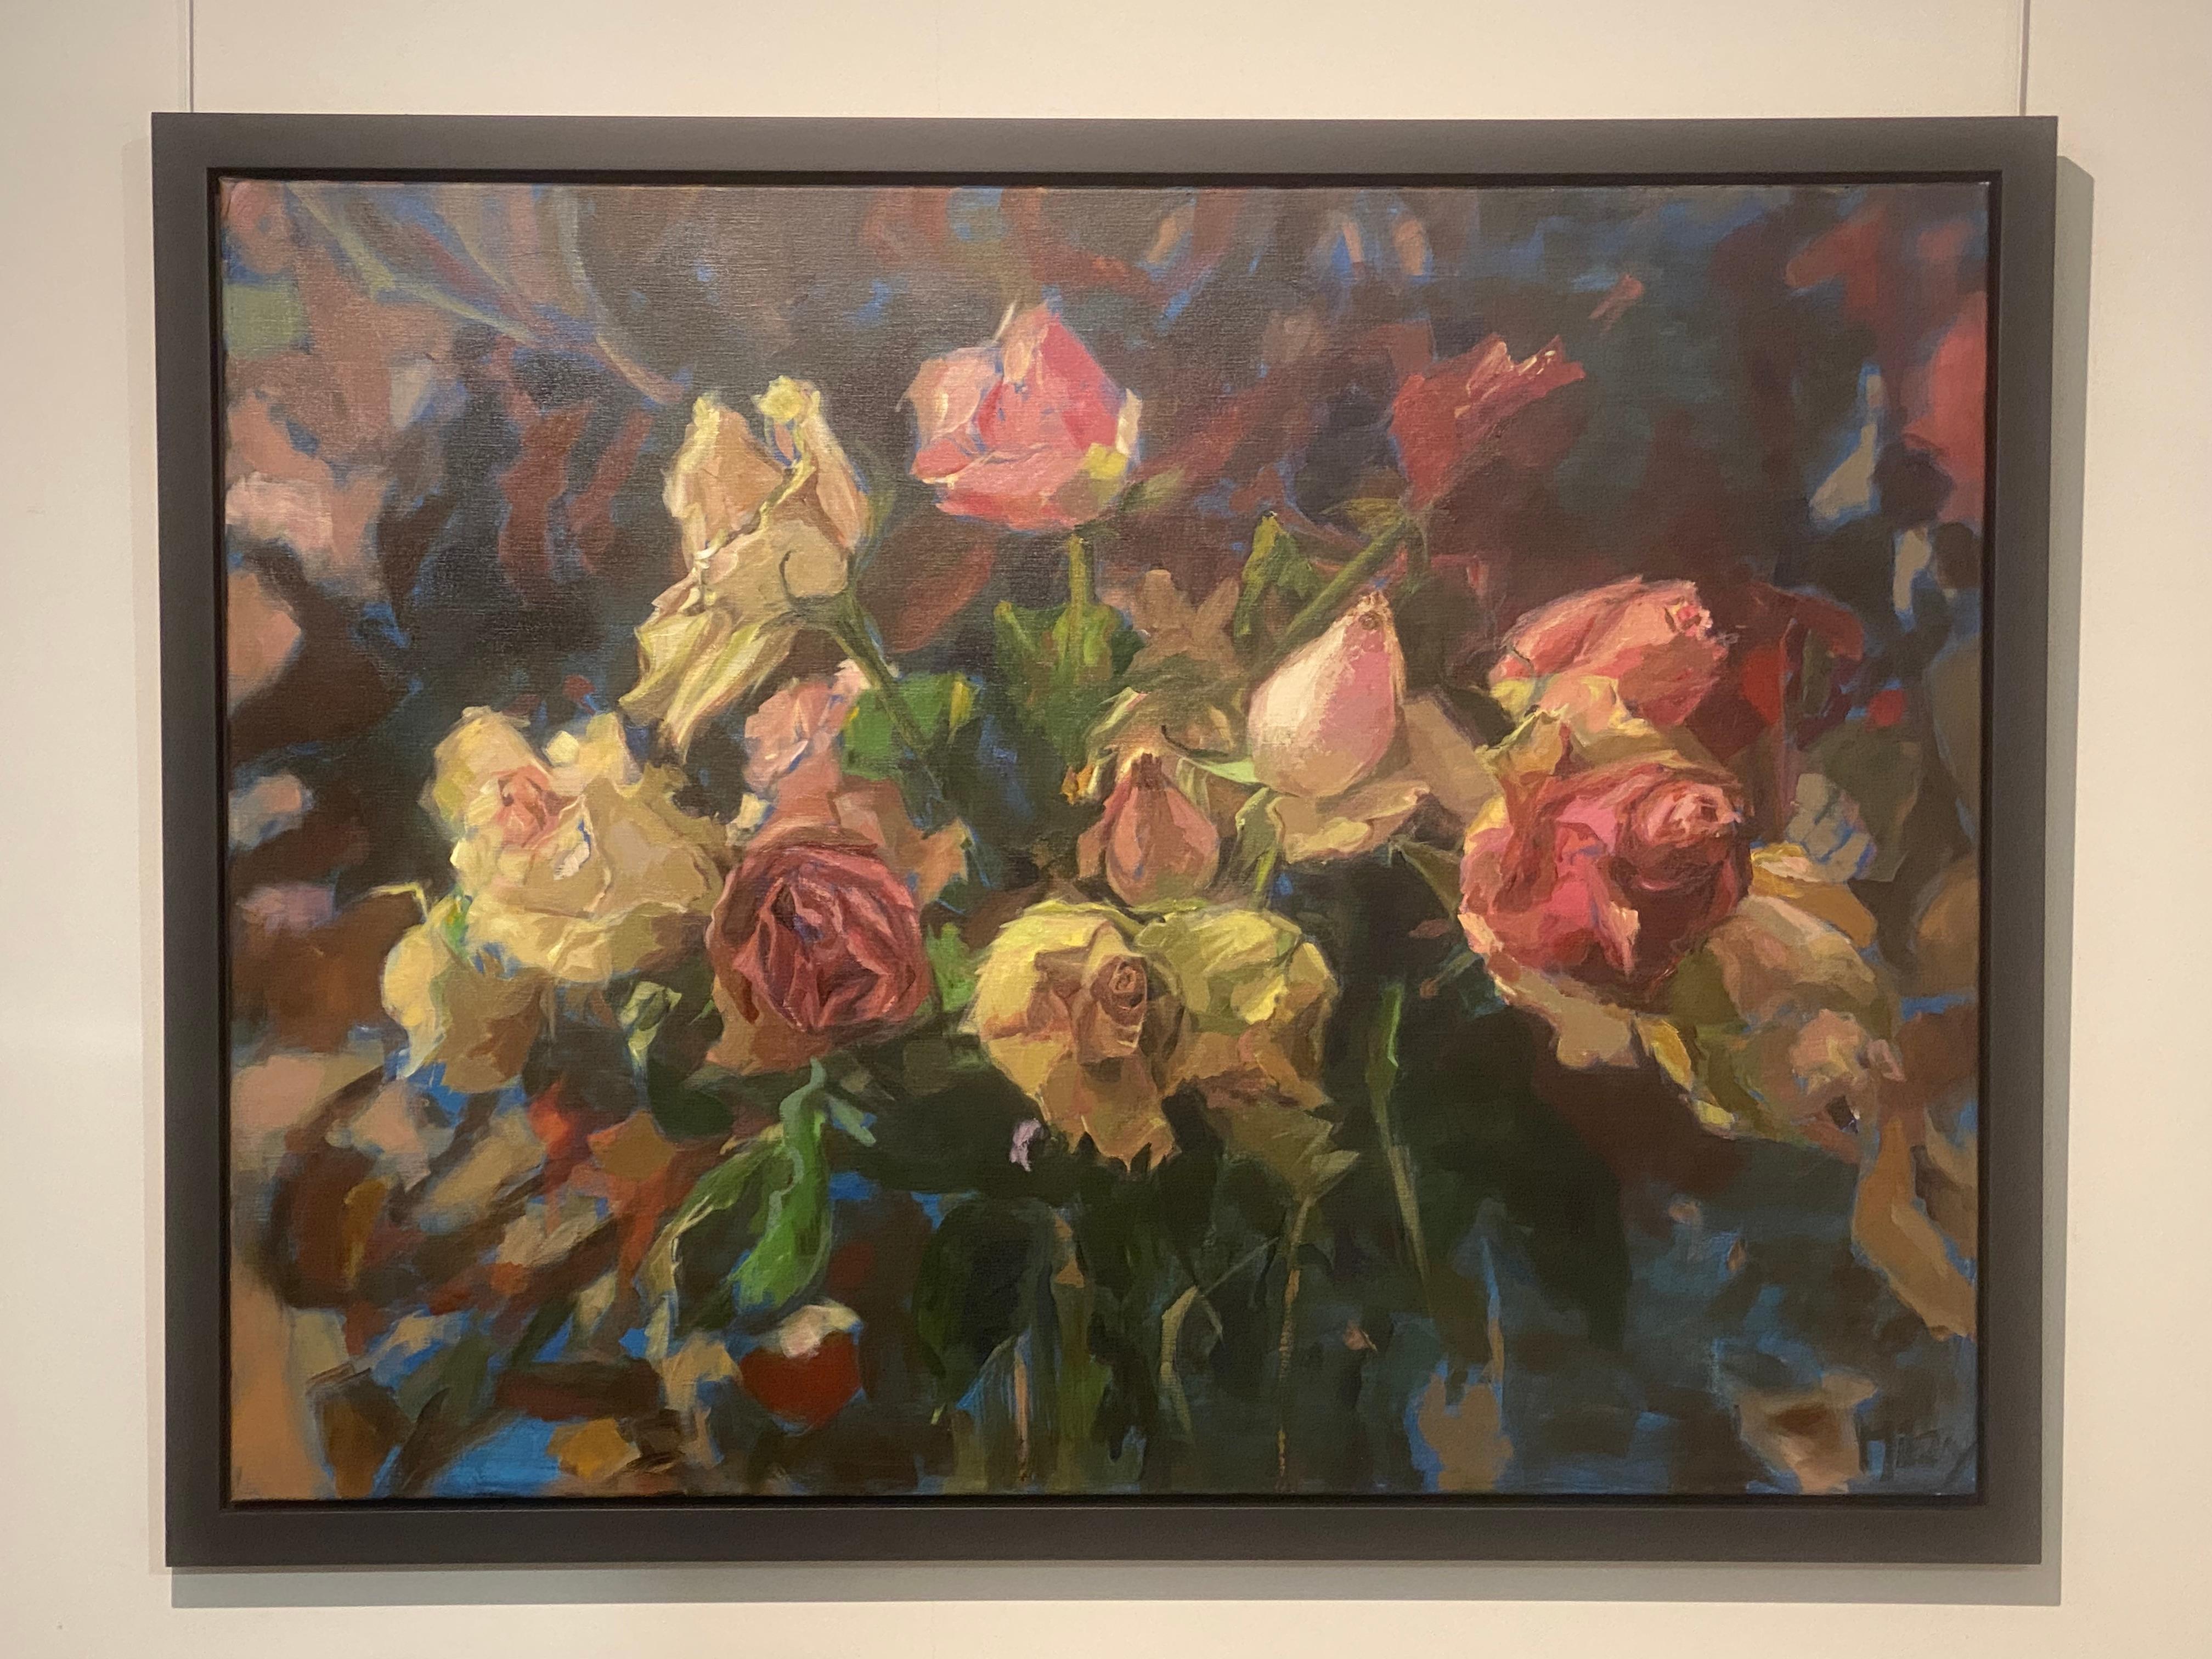 This strong painting 'Roses' is made by Dutch artist Mitzy Renooy.

Her well-performed yet loose touch allows light on the places that matter. With this she shows the essence of the work without being compelling. During the earlier exhibitions at